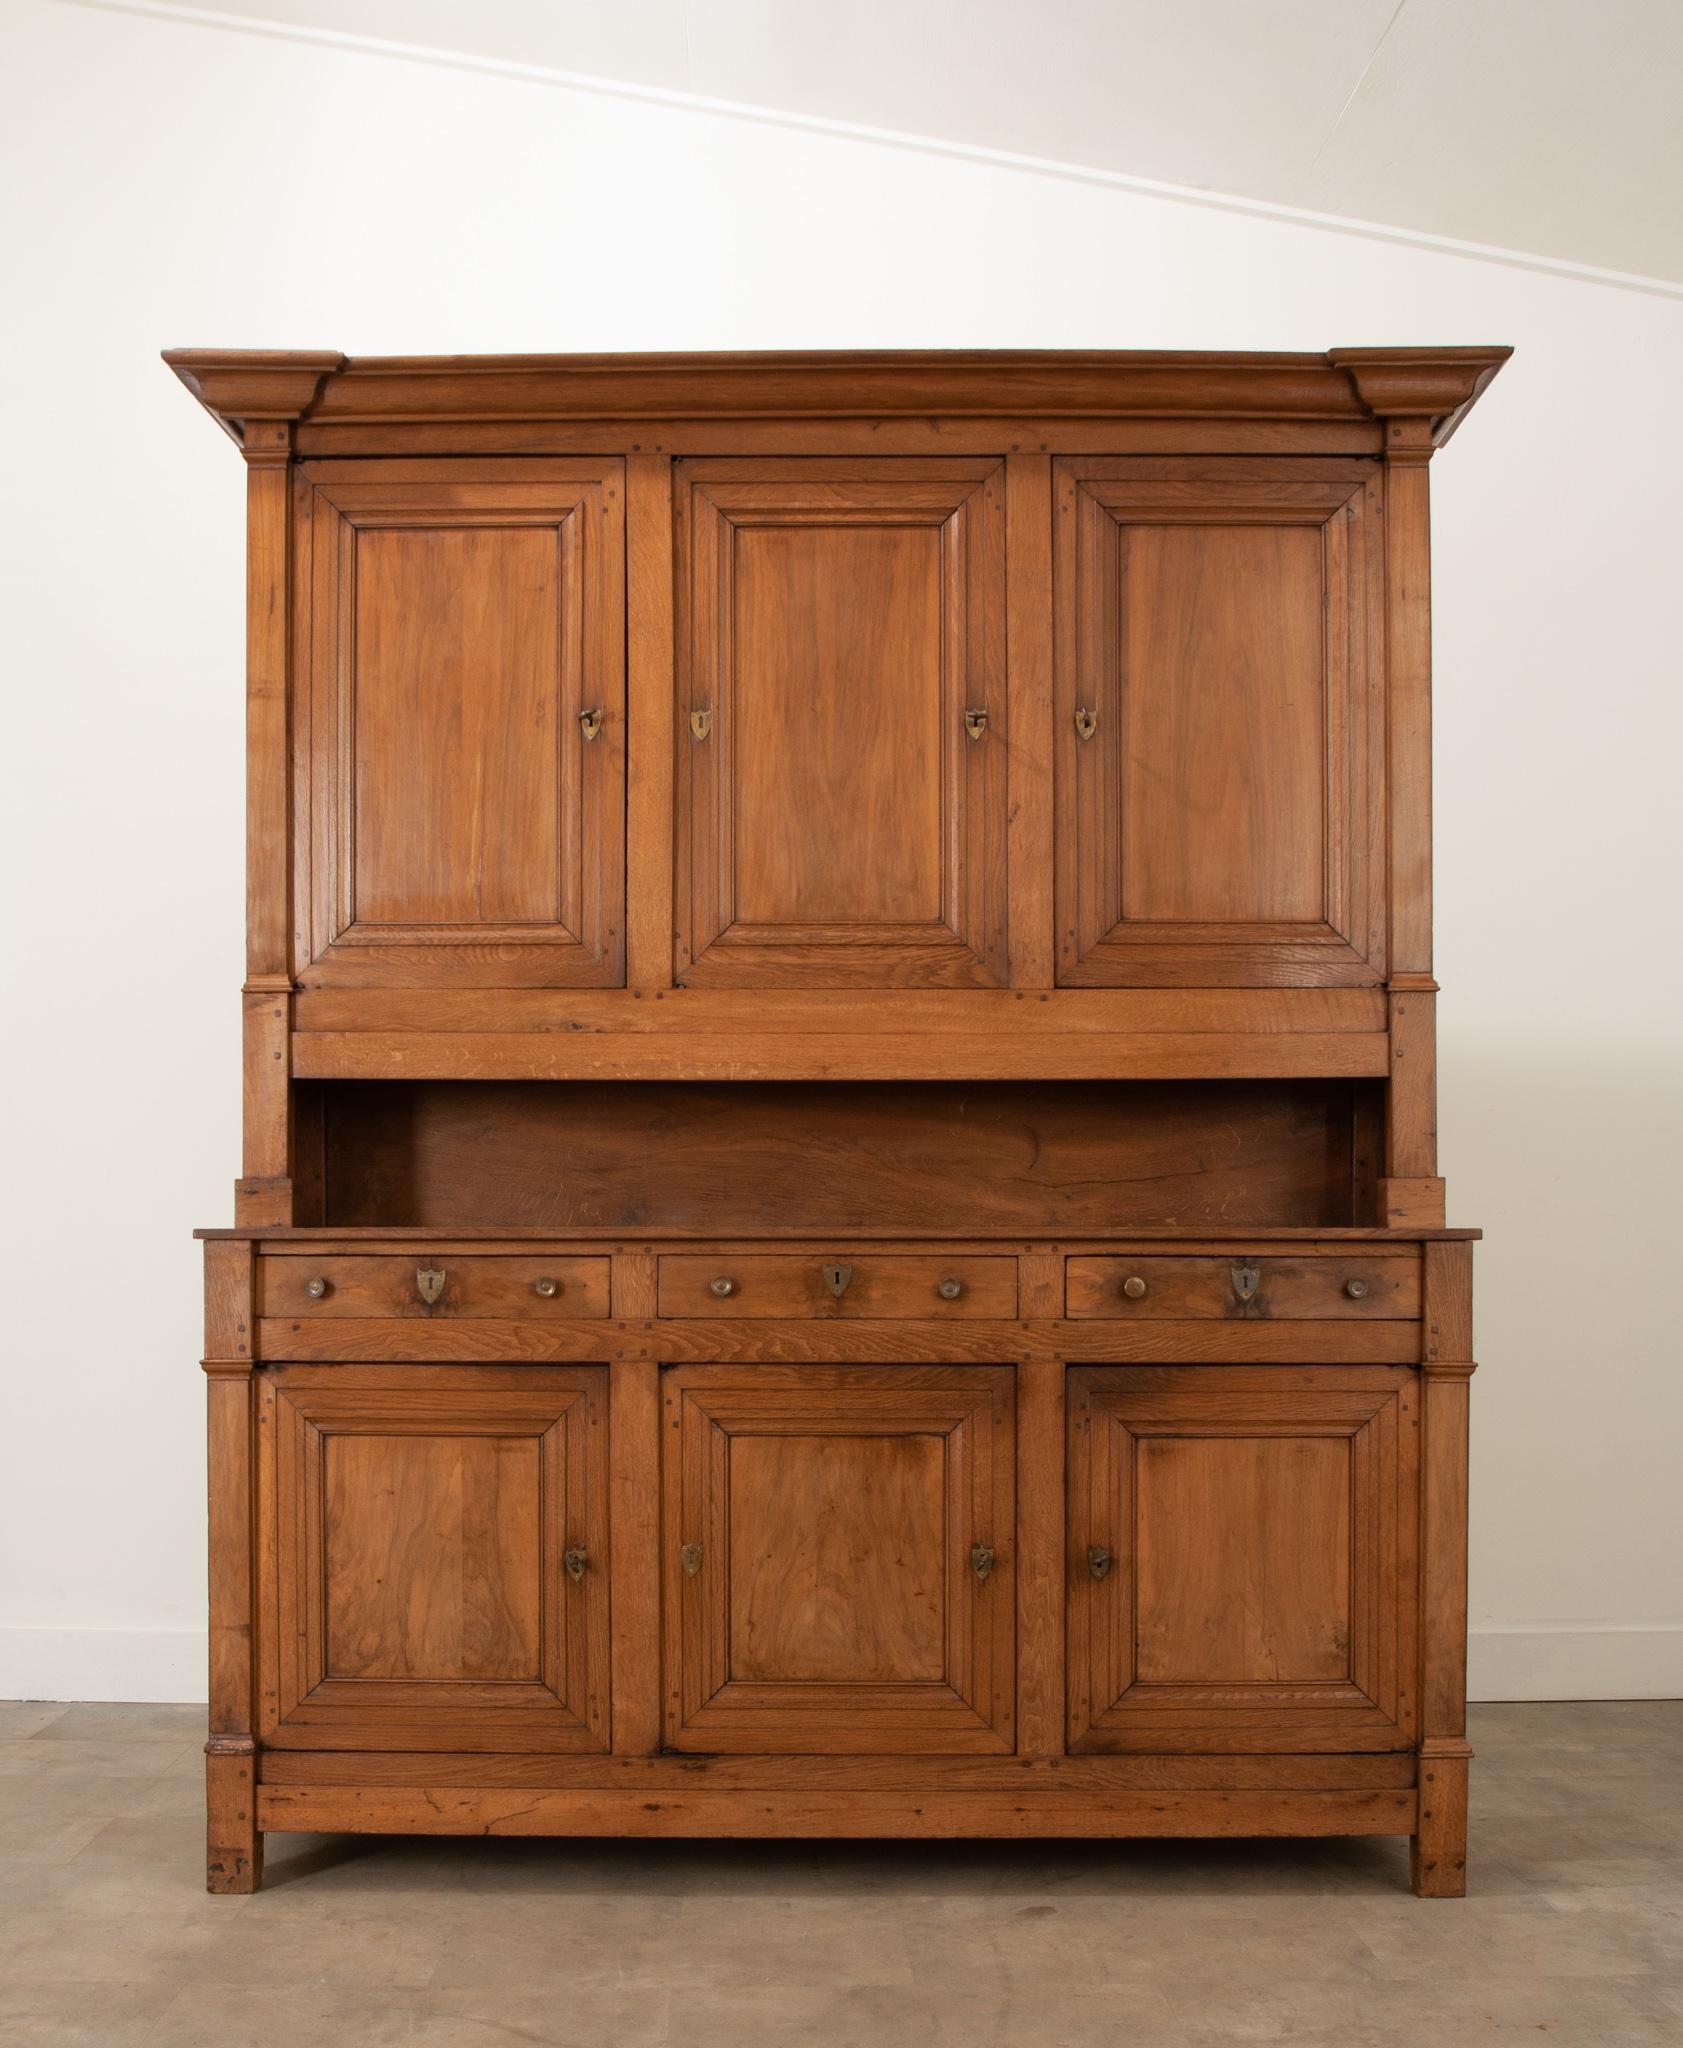 A charming solid oak buffet a deux corps crafted in France during the 19th century. A large molded cornice sits over the top of three paneled doors and are all fixed with shield shaped escutcheons. They all open to a single storage cavity with two